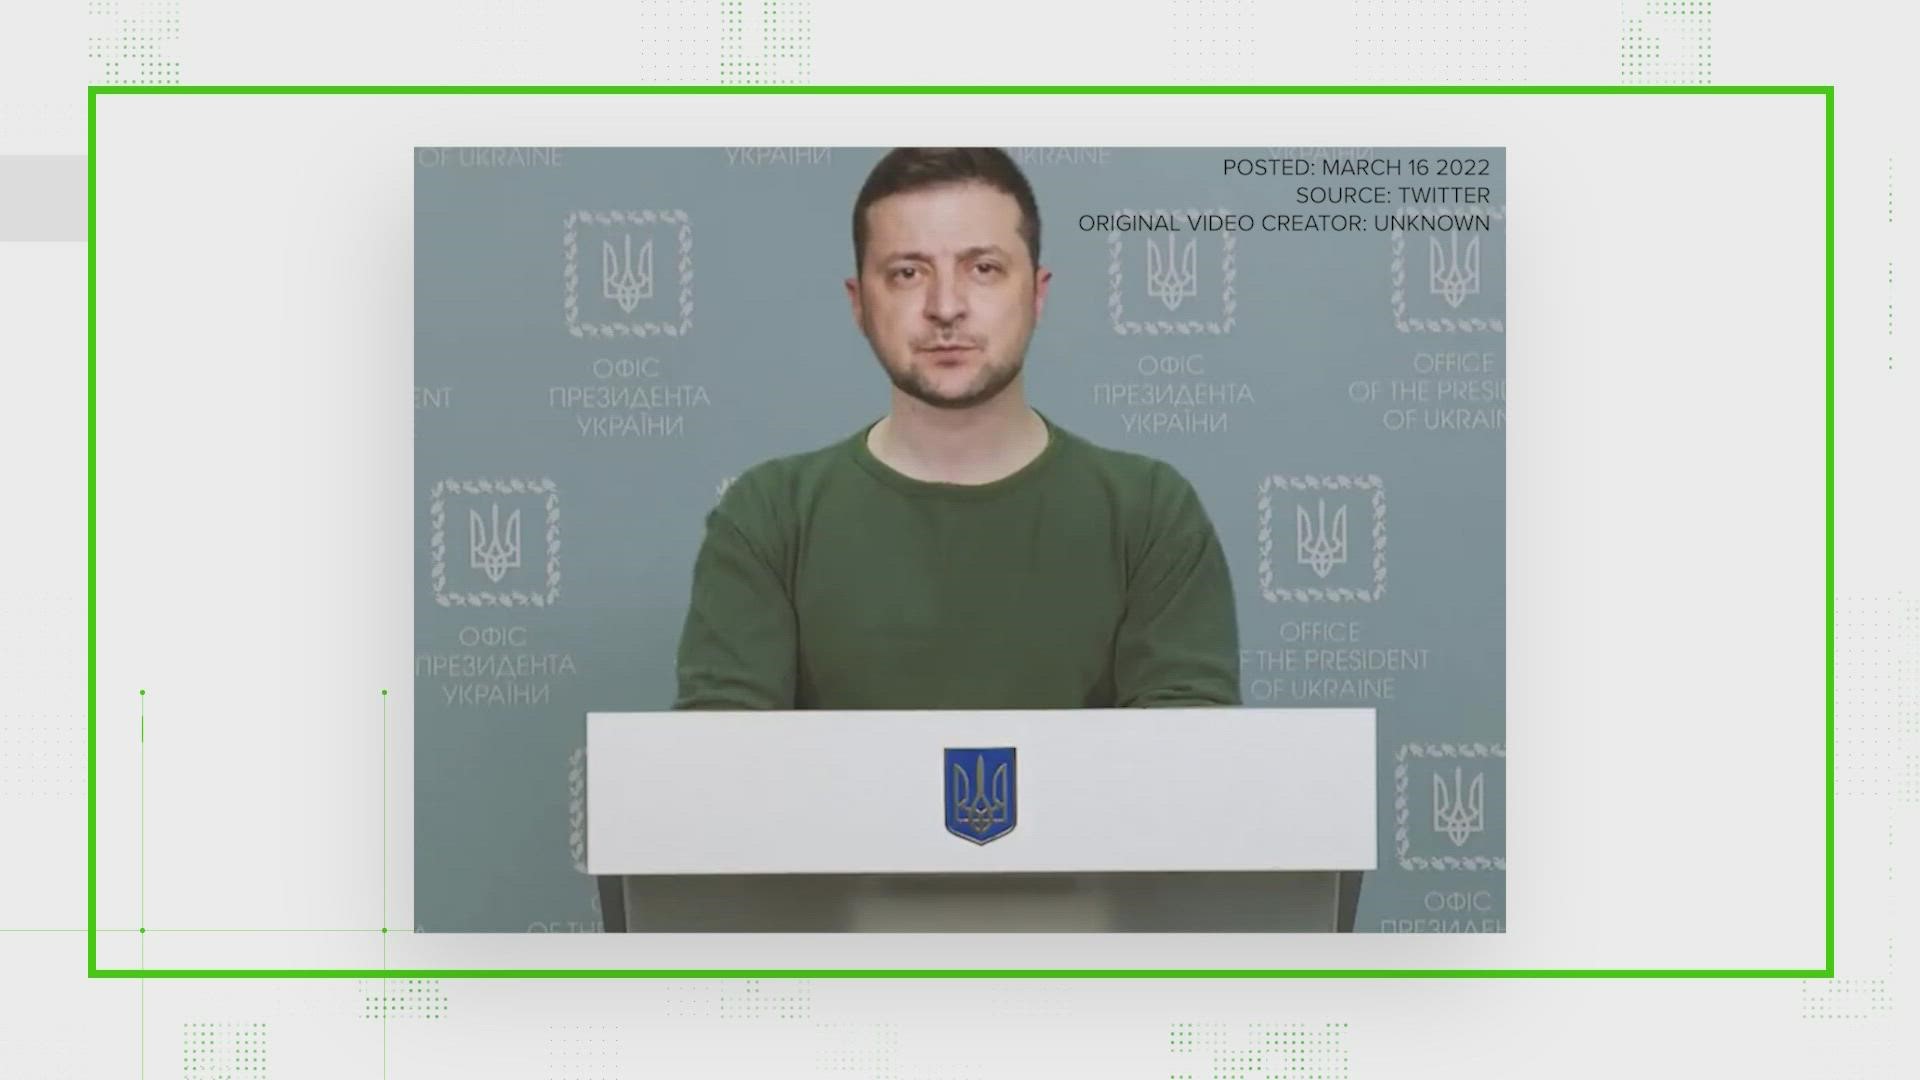 A Ukrainian news channel aired a video claiming to show the President of Ukraine urging his people to surrender and people had a lot of questions.